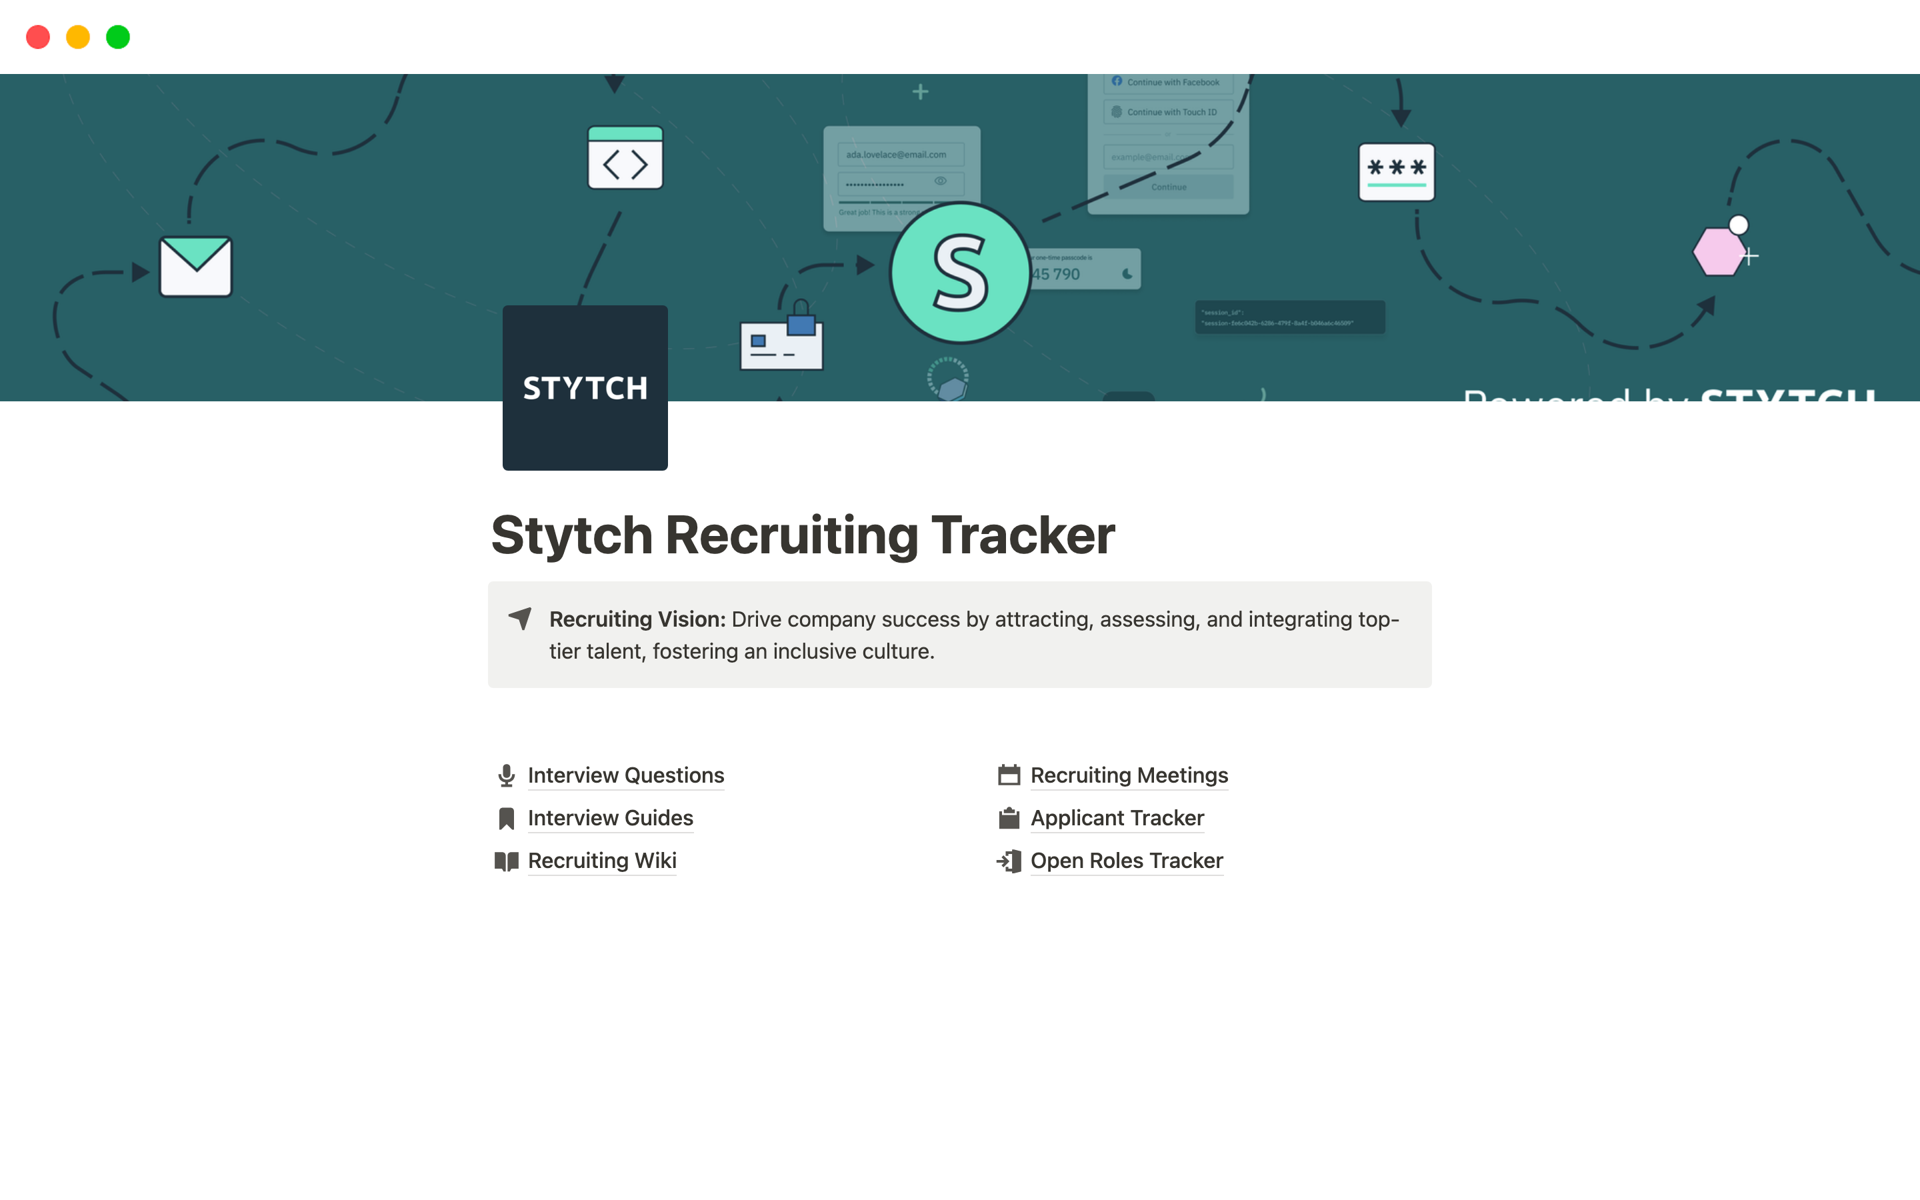 Stytch’s Recruiting Tracker on Notion offers a focused approach to hiring for engineering roles.